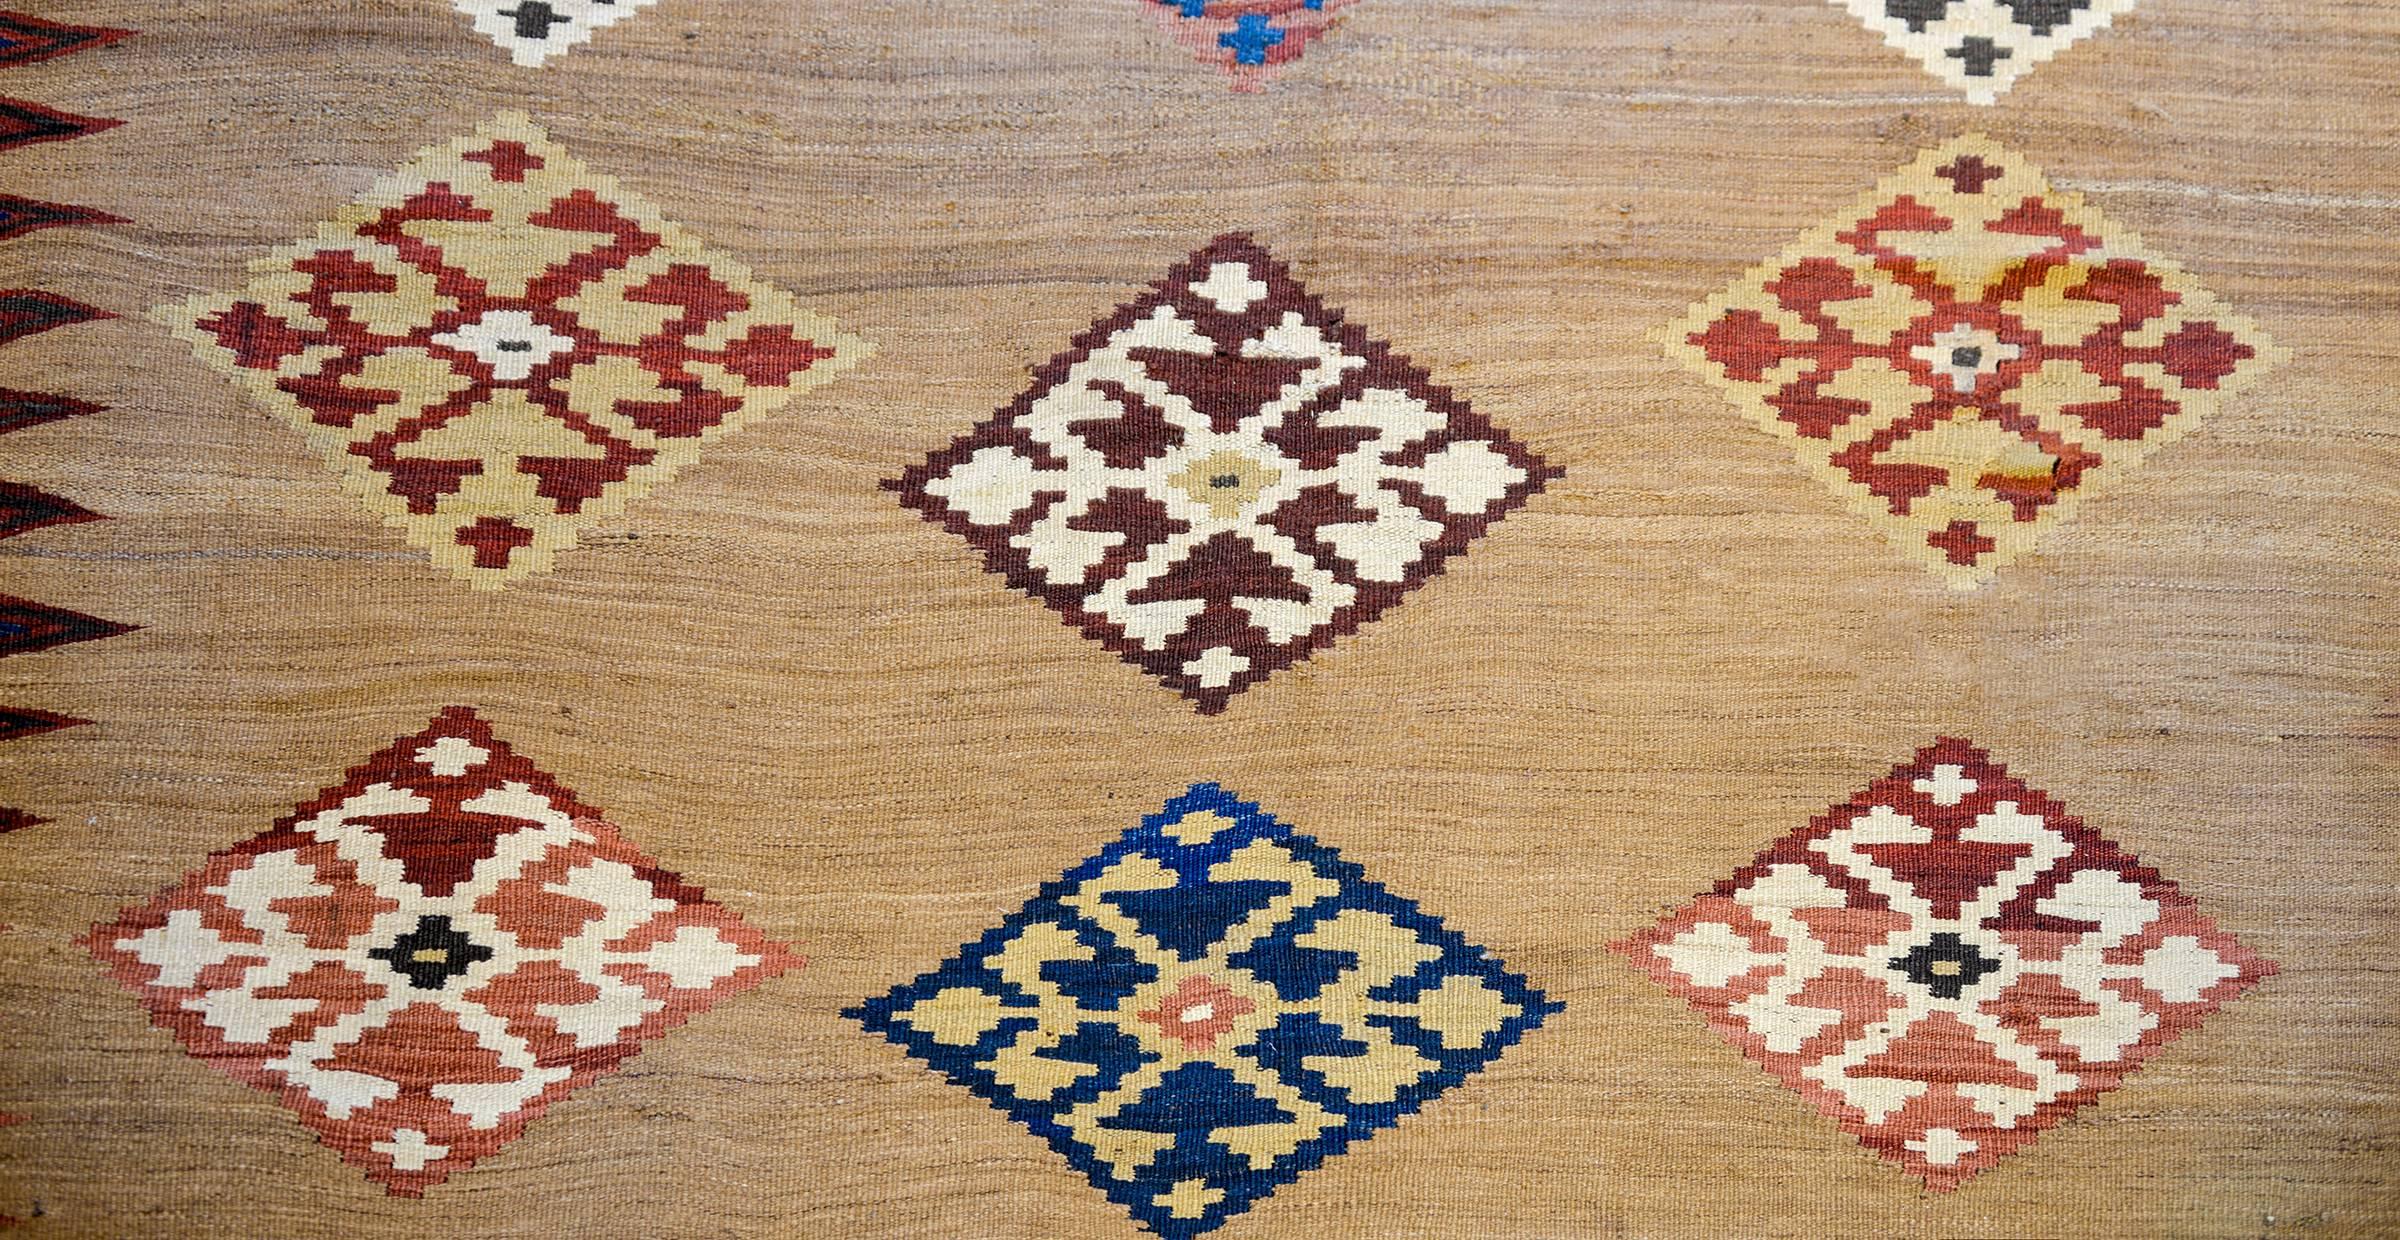 A memorable early 20th century Persian Azeri Kilim rug with one large diamond medallion flanked by multiple smaller diamond medallions woven in multicolored vegetable dyed wool, on an incredible natural undyed abrash camel hair background. The